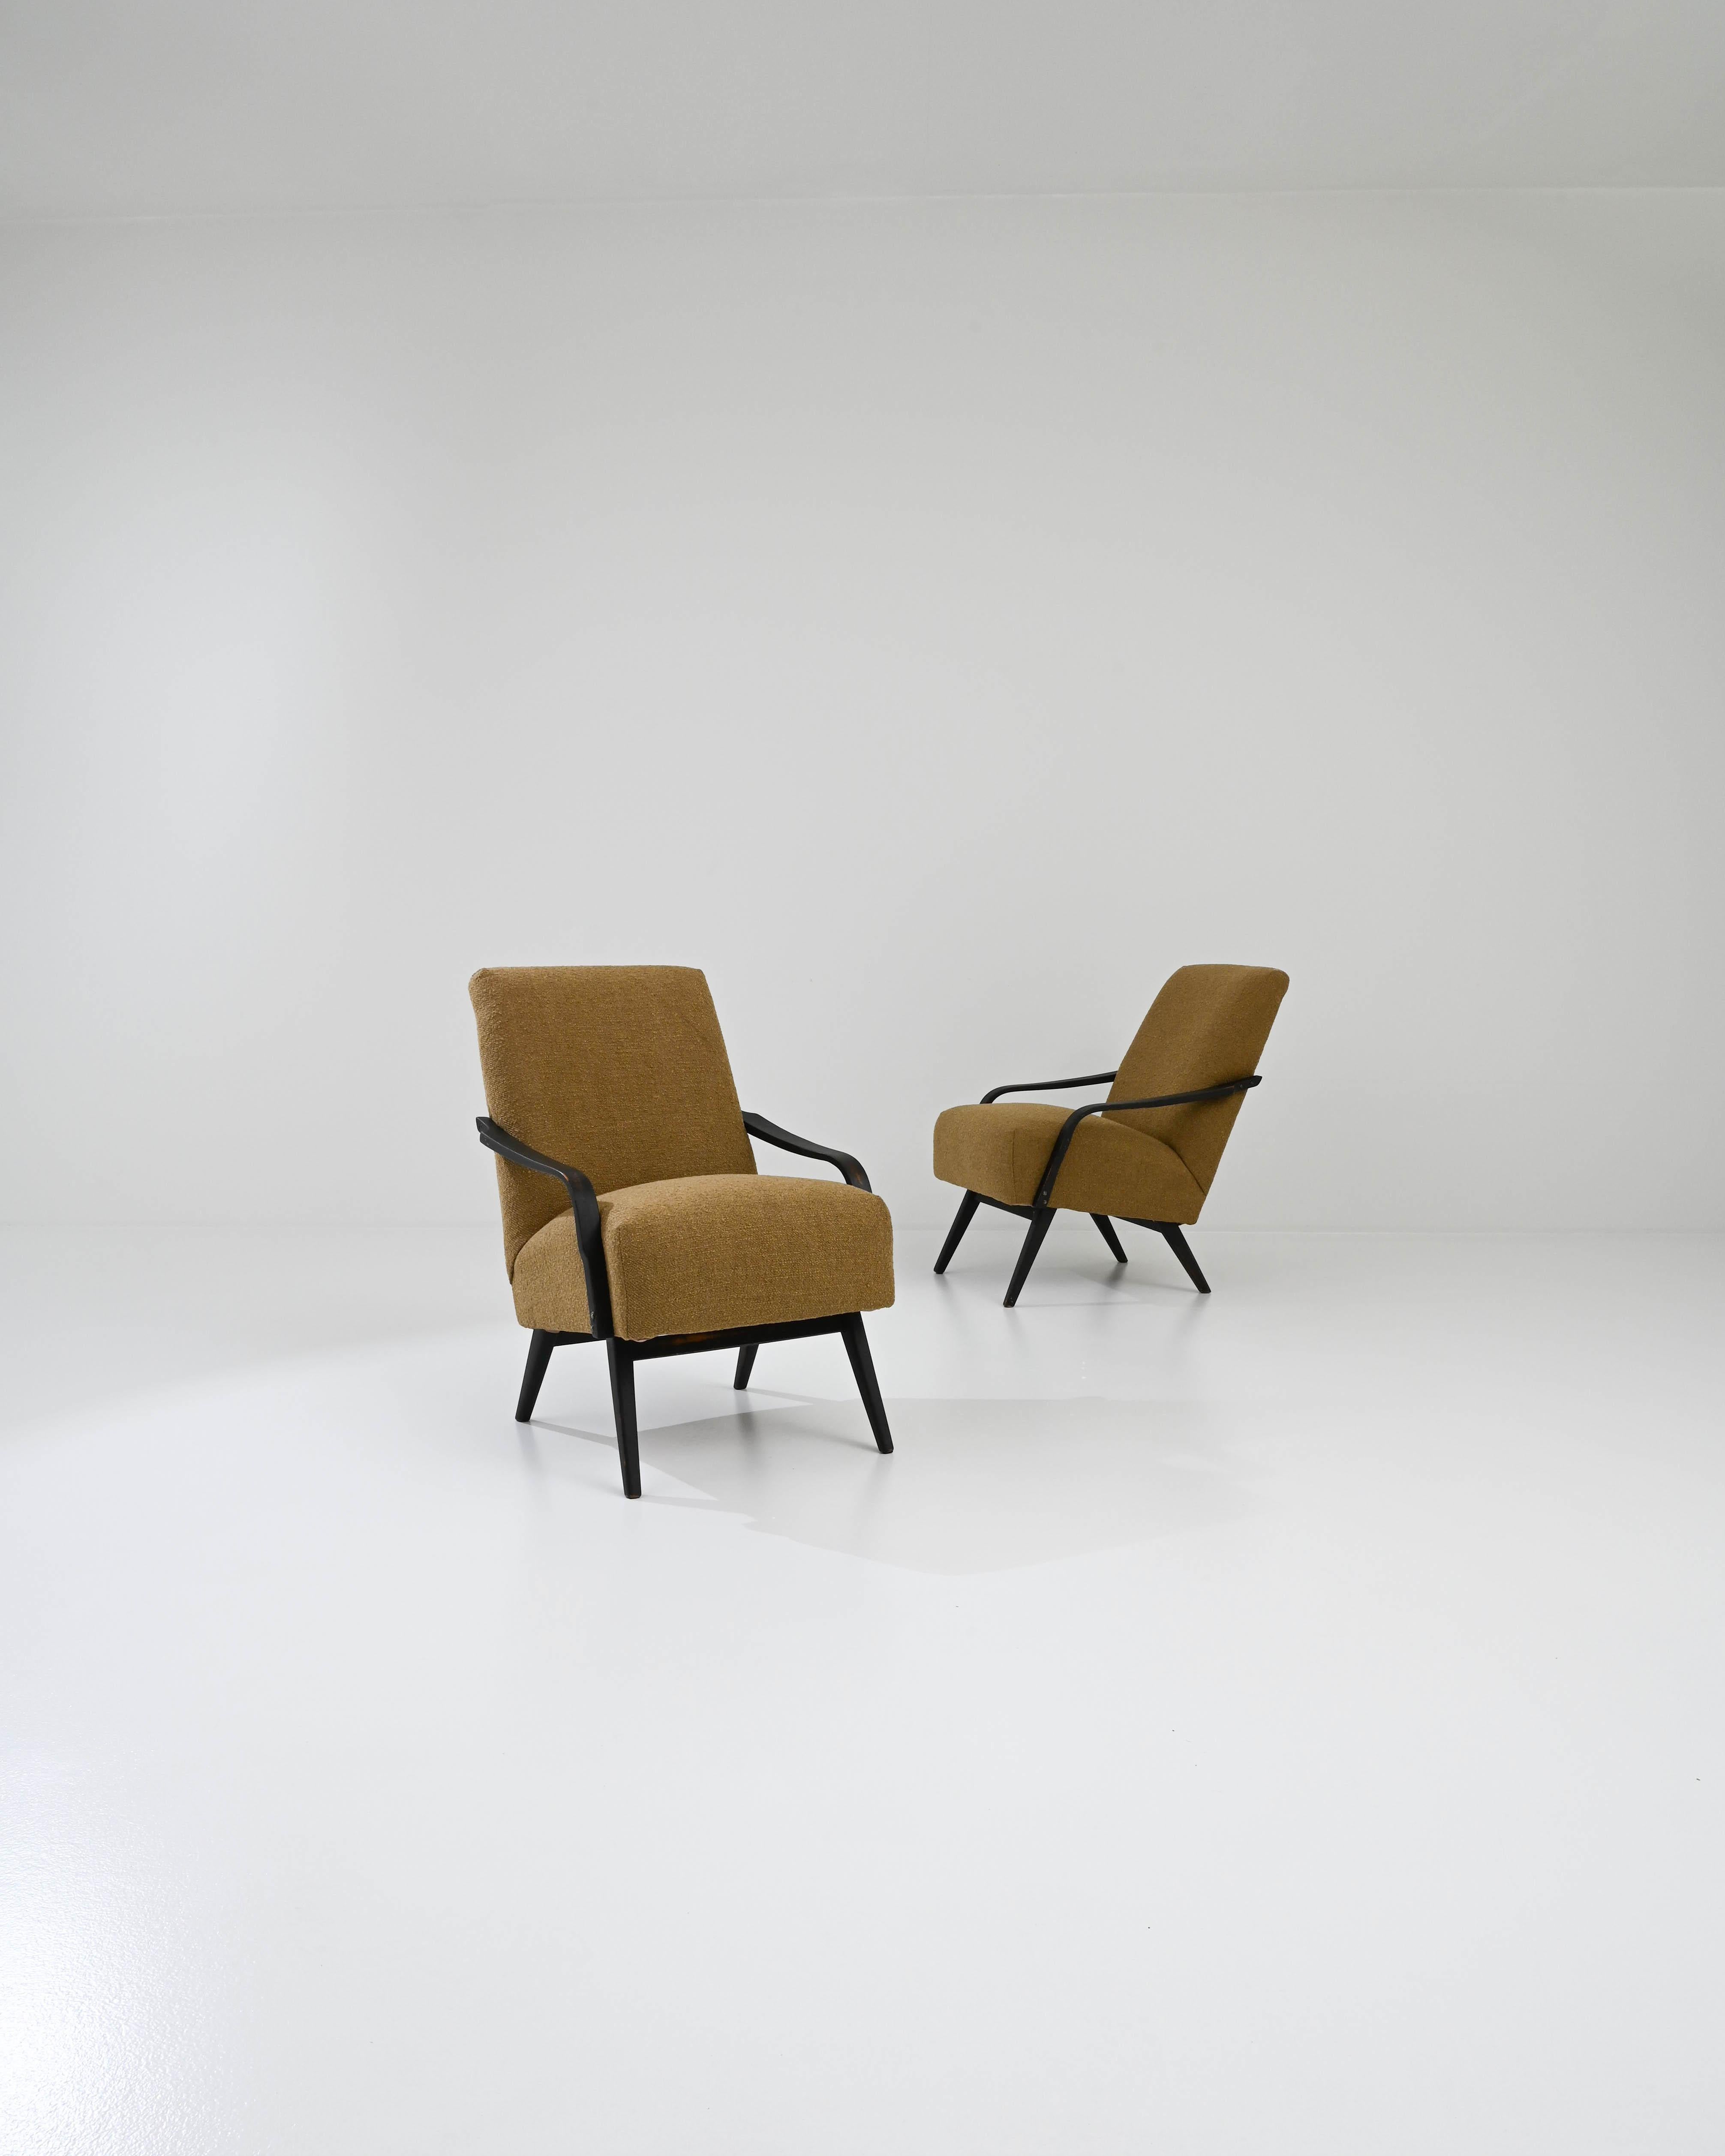 Designed and manufactured by the renowned TON furniture maker and lined in burnt caramel colors, this pair of vintage Mid-century modern chairs present an easy-going, yet sober accent. These curved bentwood armchairs invite you to spend leisure